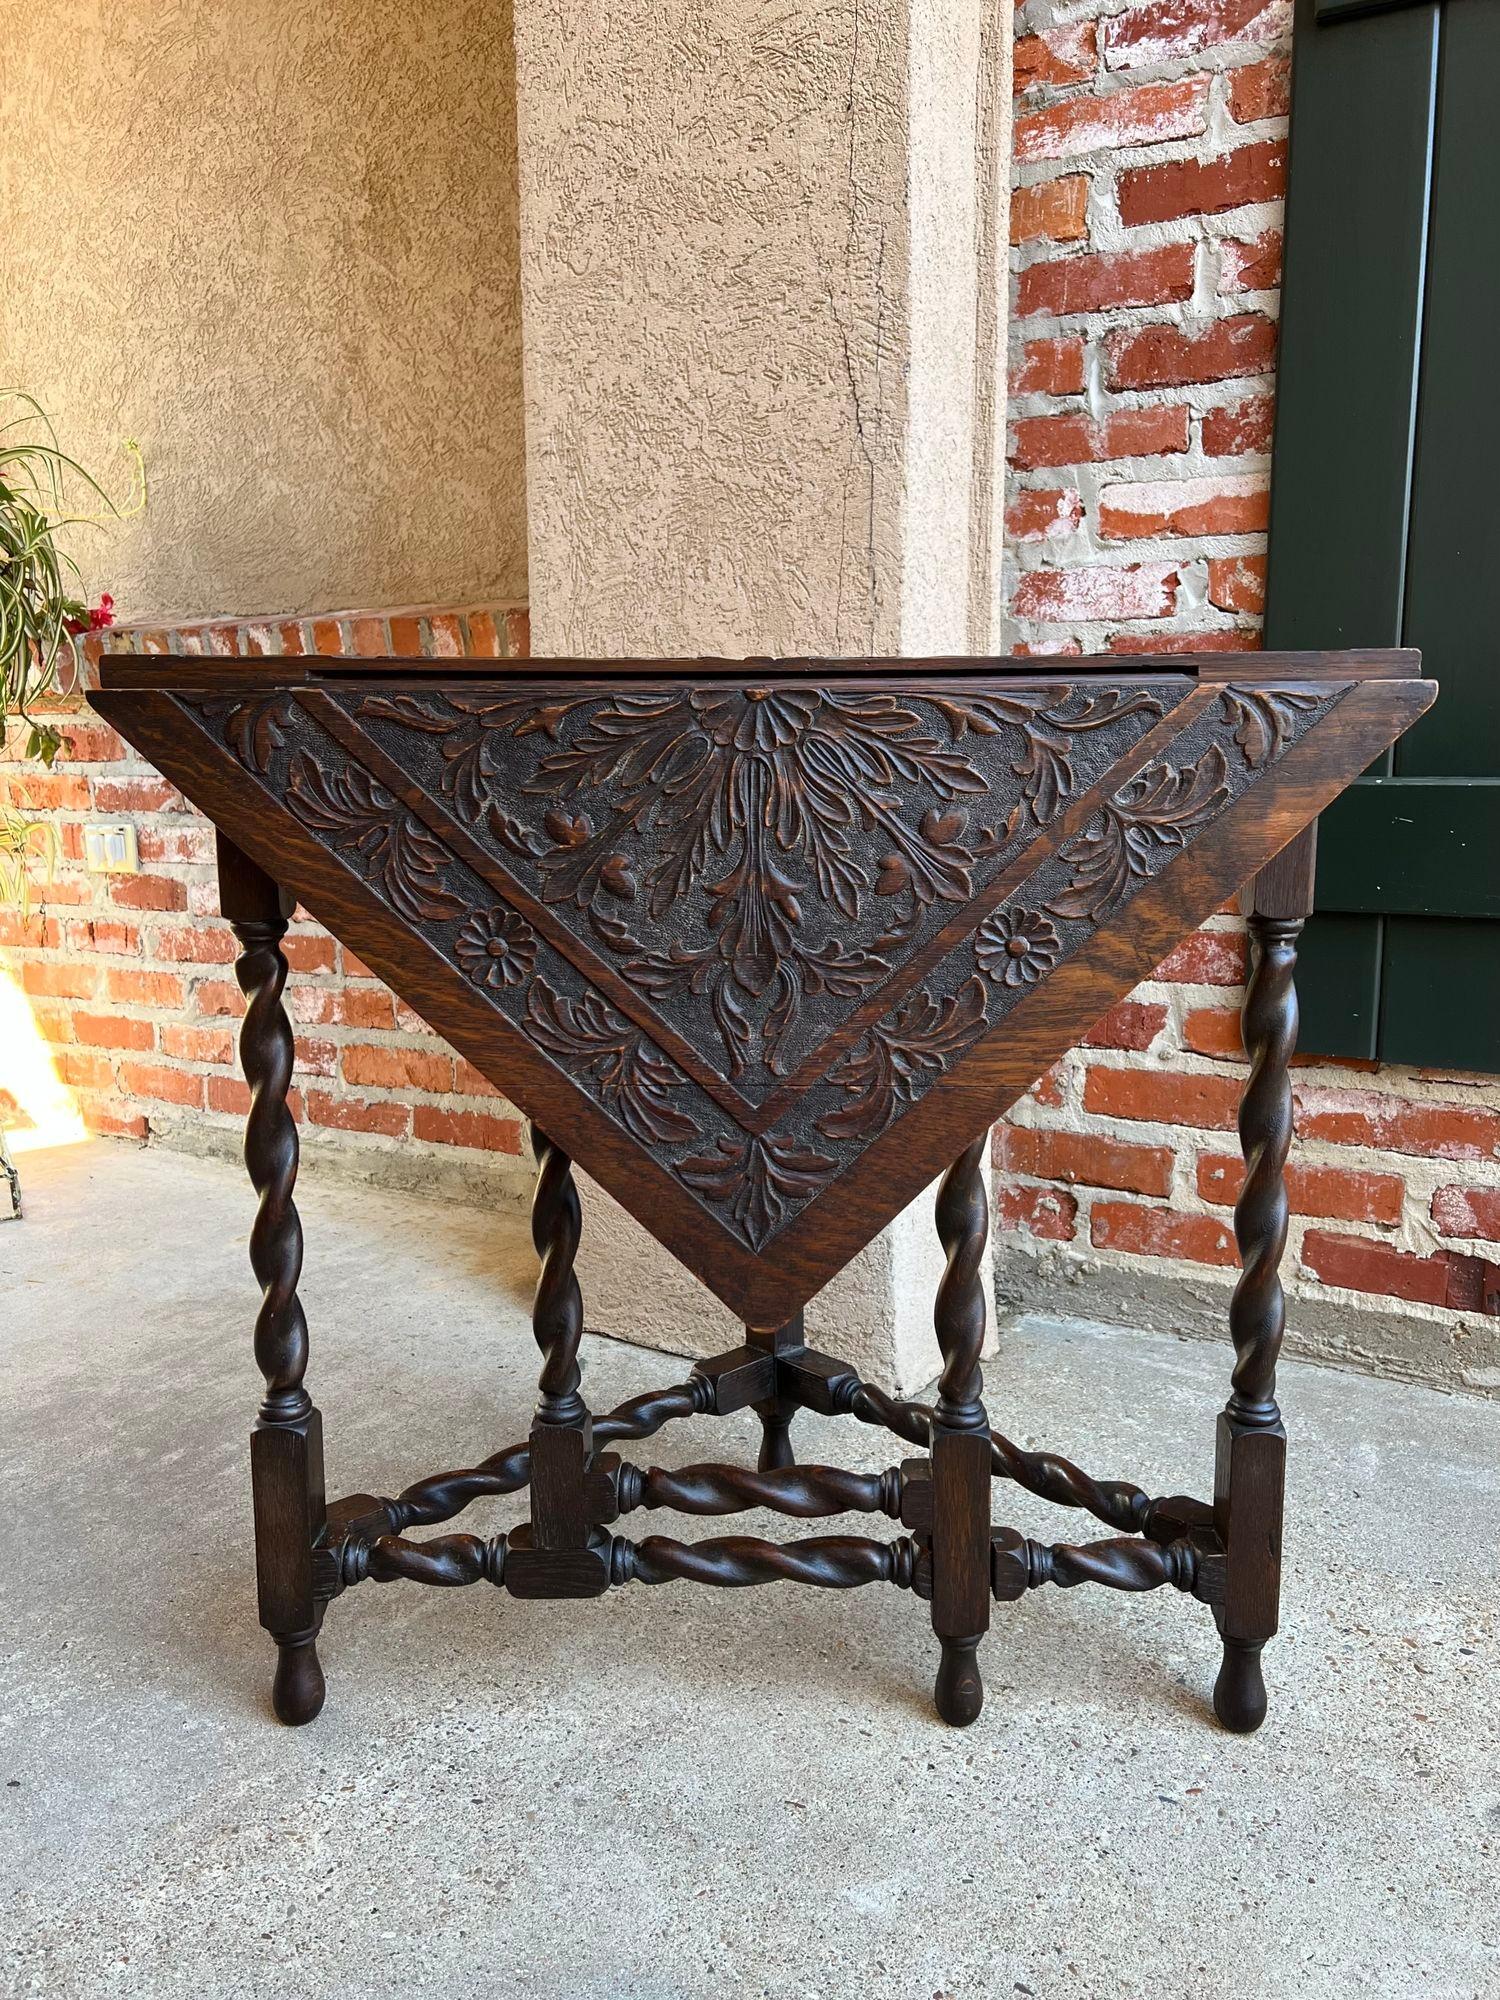 Antique English Corner Table Handkerchief Drop Leaf Barley Twist Carved Oak.

 Direct from England, a highly sought-after antique “handkerchief” table or “corner table” as it can easily be tucked in a corner with the leaf down. With leaf up, it’s